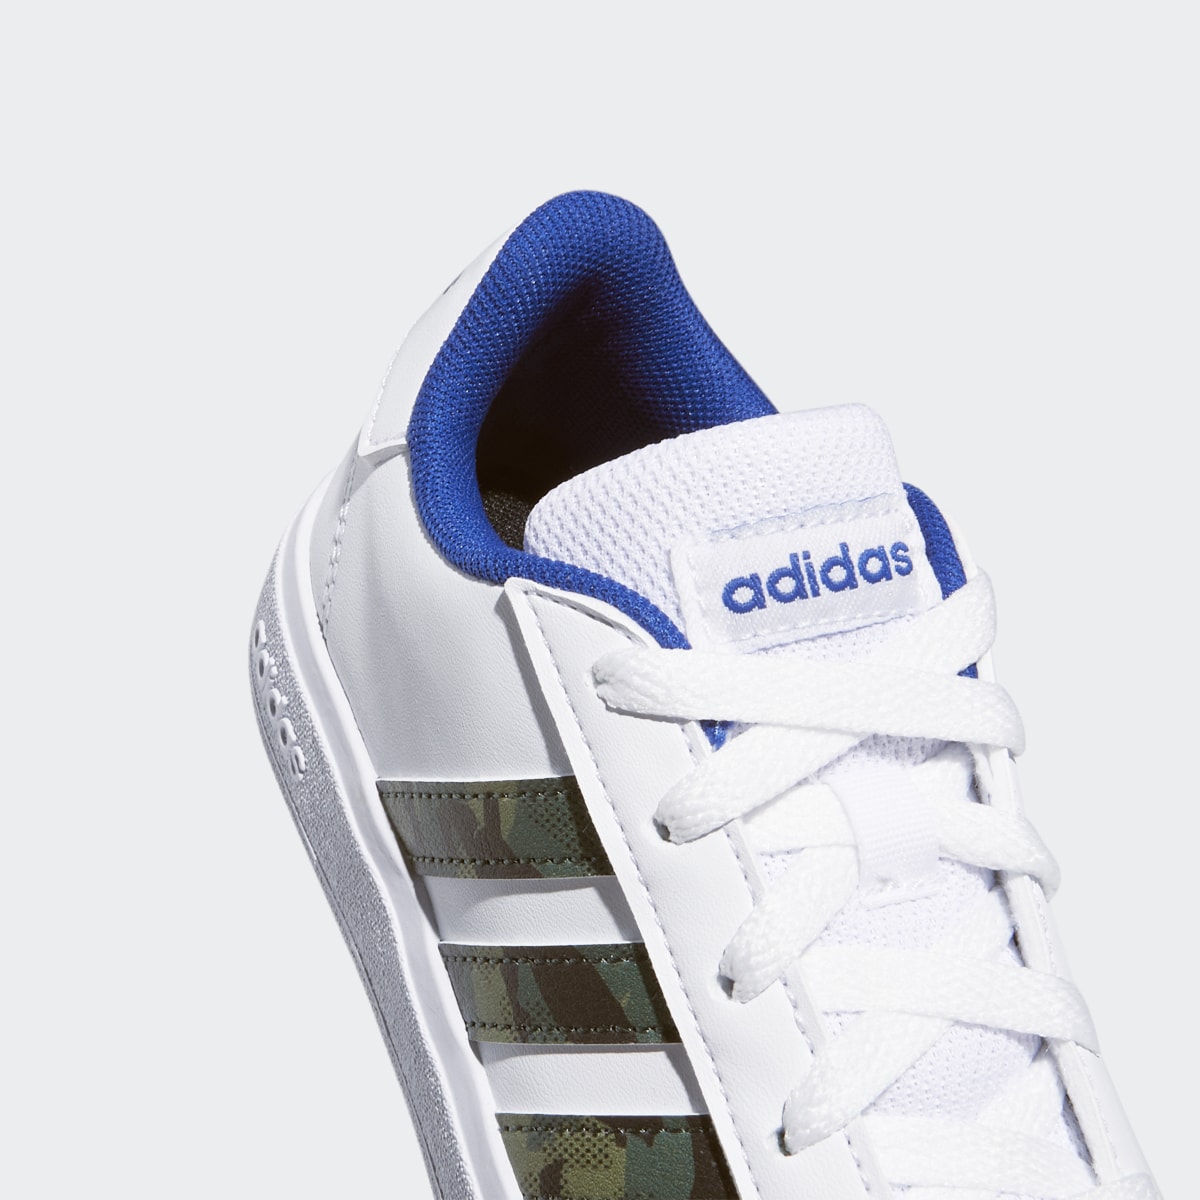 Adidas Grand Court Lifestyle Lace Tennis Schuh. 9